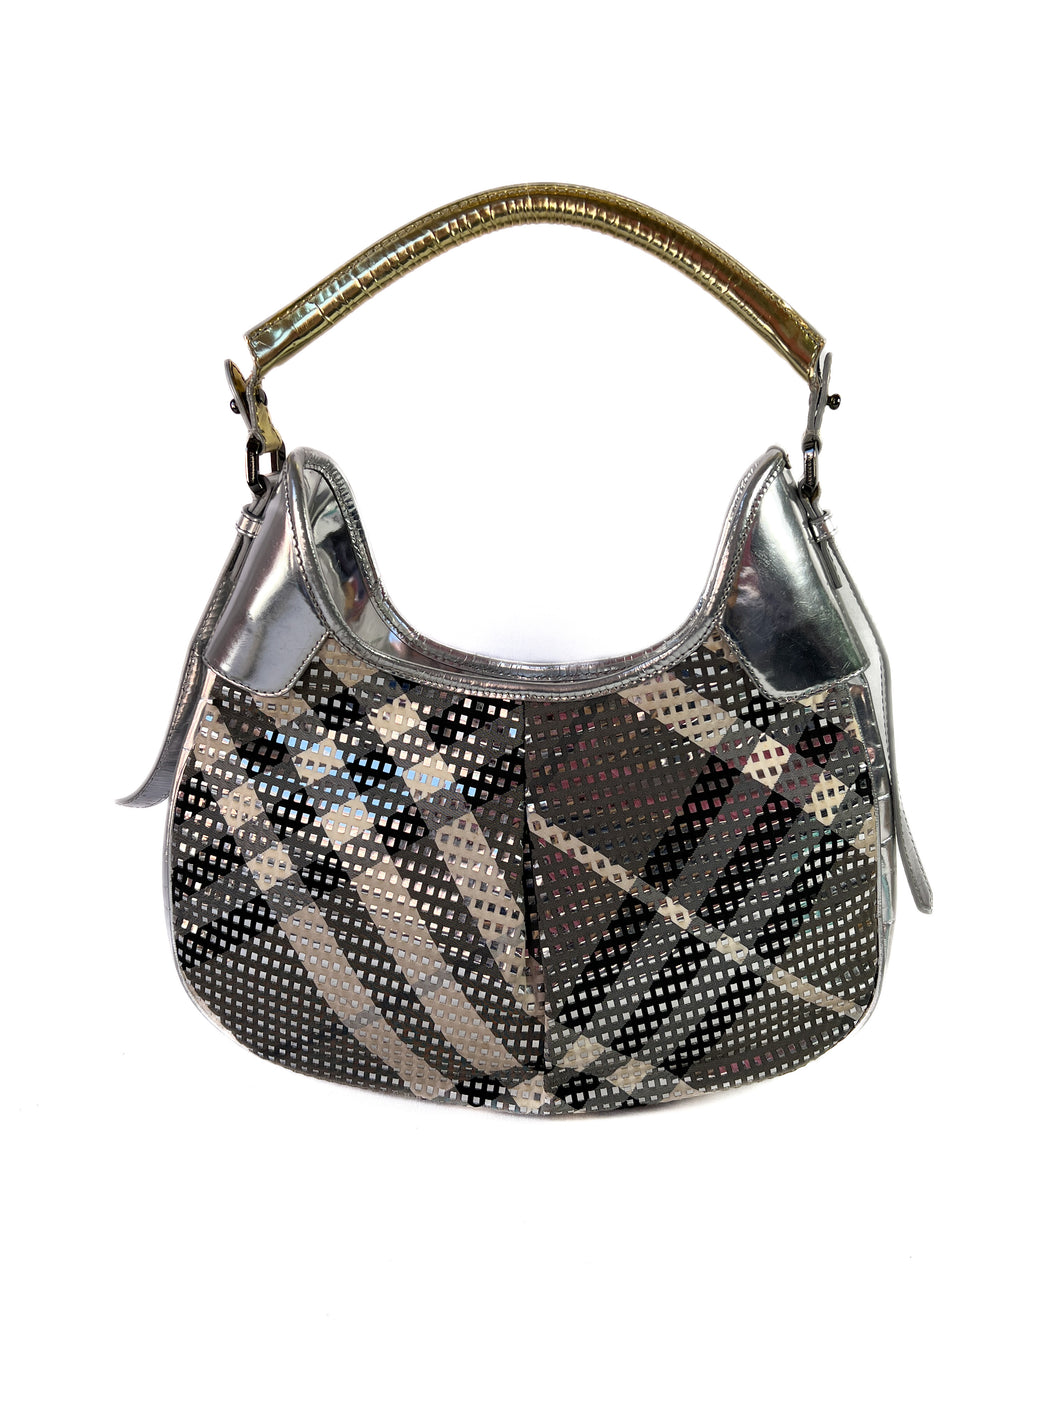 Burberry gray plaid silver and gold shoulder bag